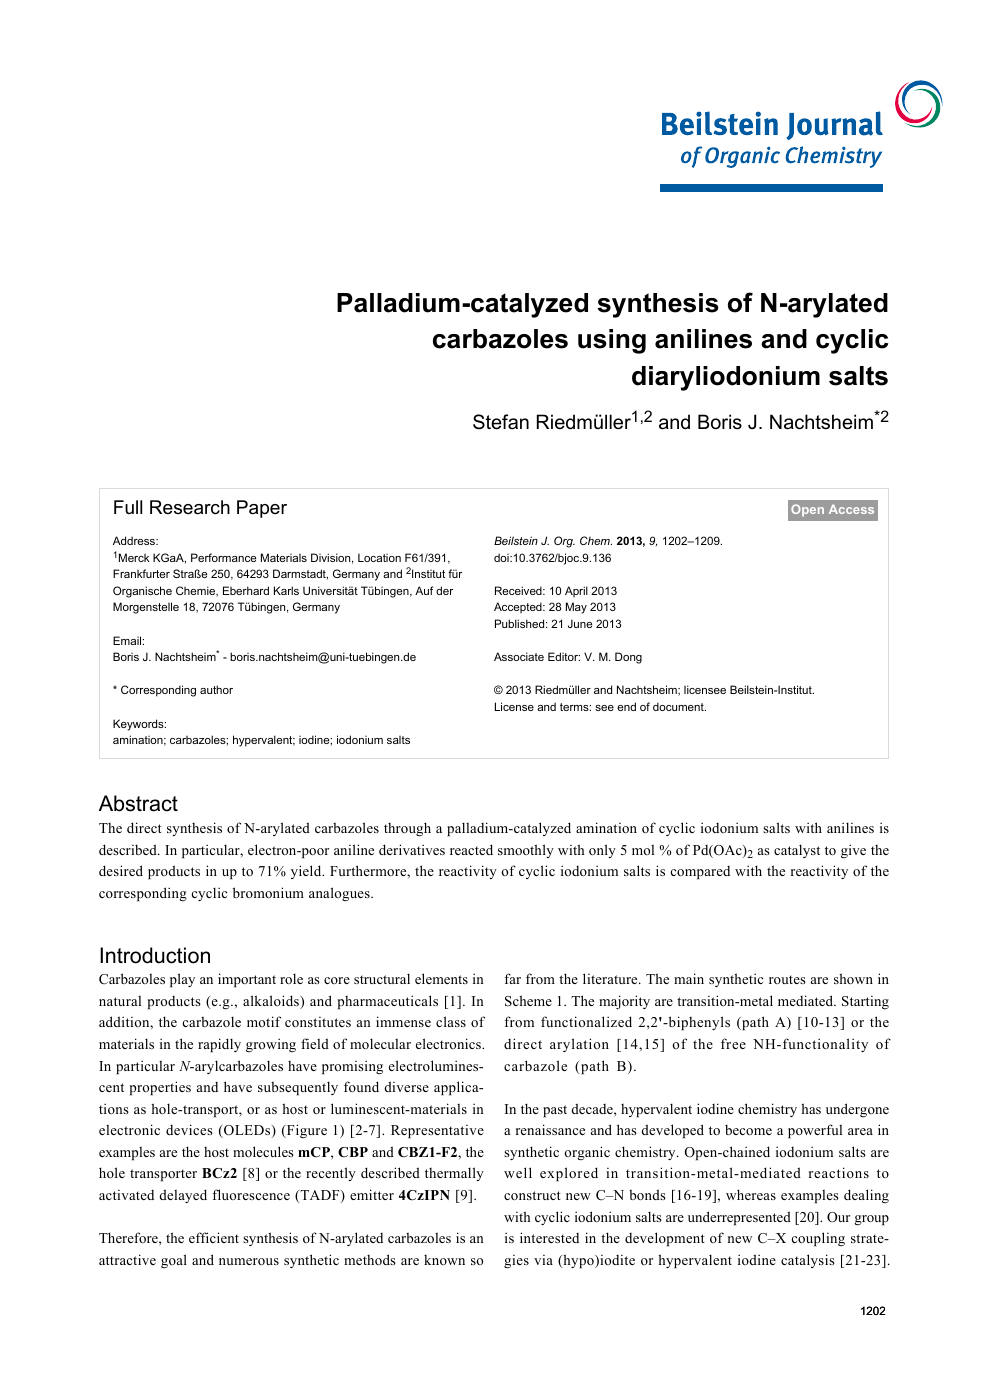 Palladium Catalyzed Synthesis Of N Arylated Carbazoles Using Anilines And Cyclic Diaryliodonium Salts Topic Of Research Paper In Chemical Sciences Download Scholarly Article Pdf And Read For Free On Cyberleninka Open Science Hub